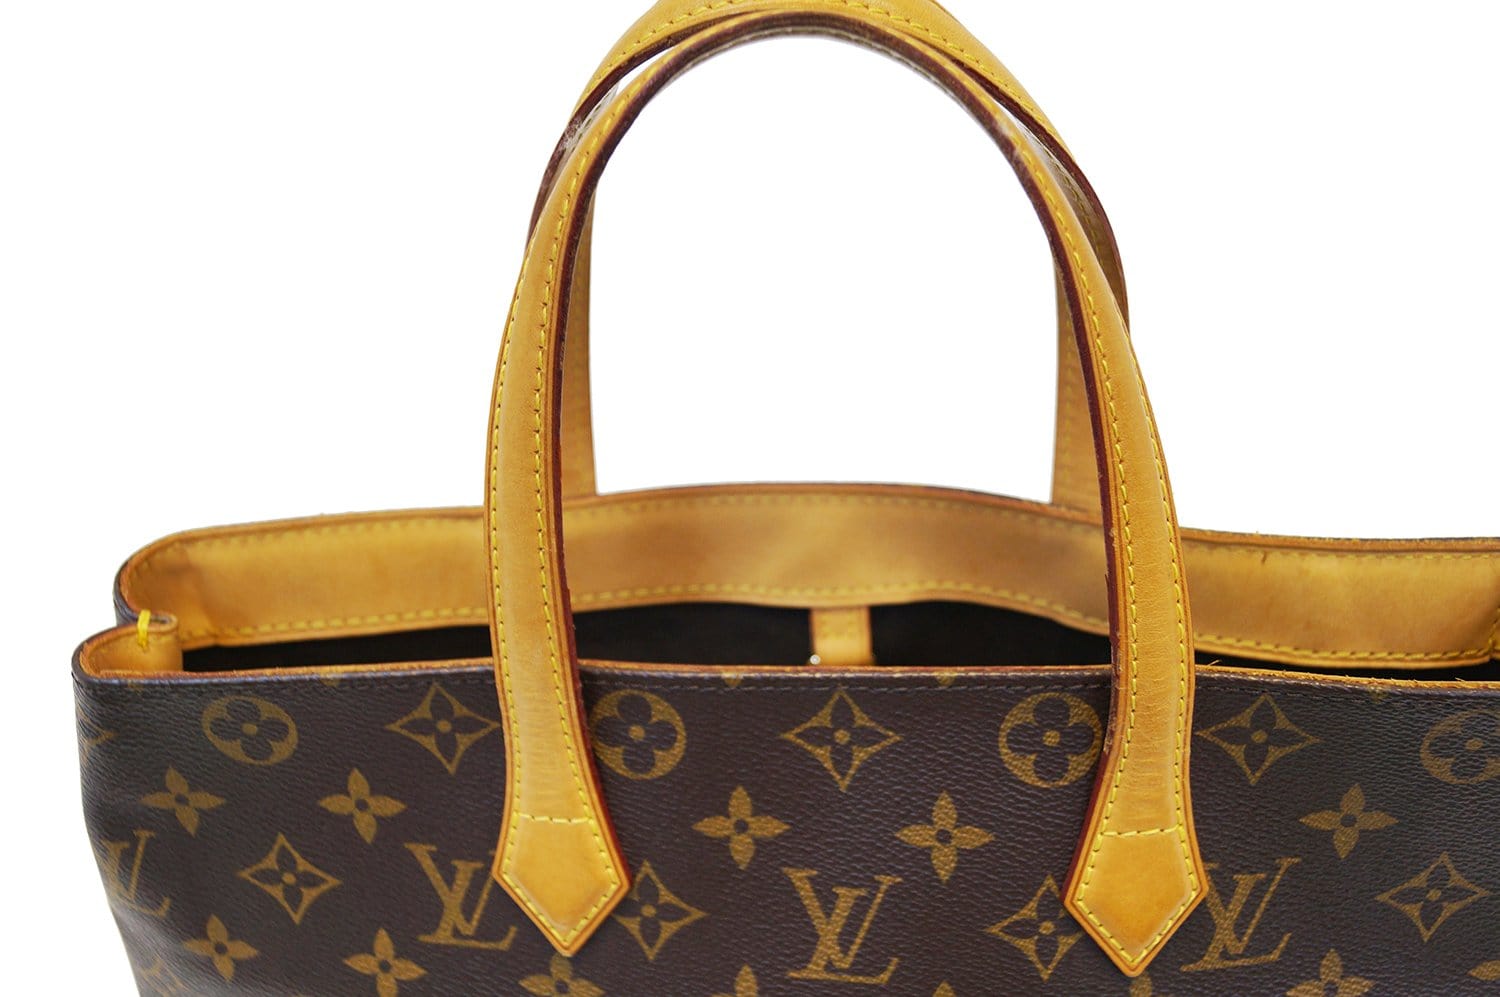 A Guide to Authenticating the Louis Vuitton Monogram Wilshire Purse  (Authenticating Louis Vuitton) - Kindle edition by Republic, Resale, Weis,  Molly.